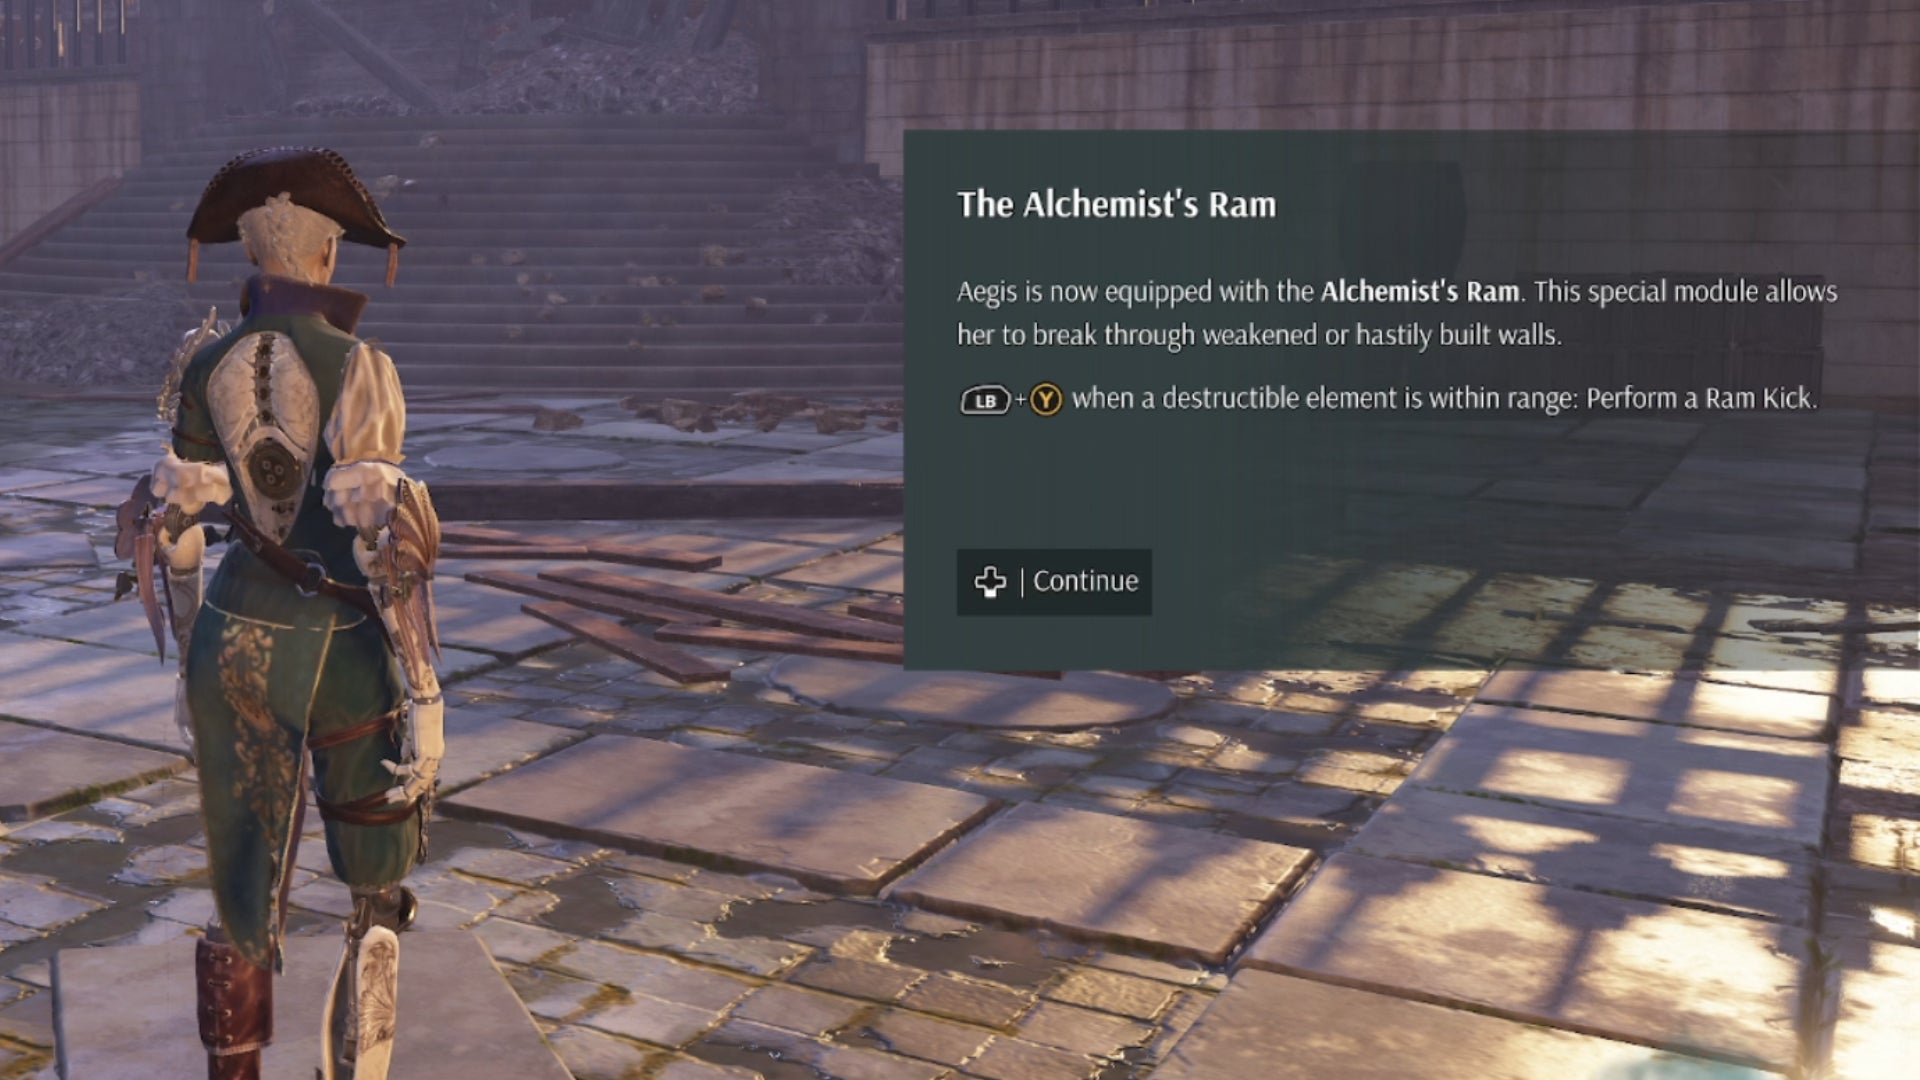 Some in-game text in Steelrising which explains the purpose of the Alchemist's Ram tool in opening secret passageways.